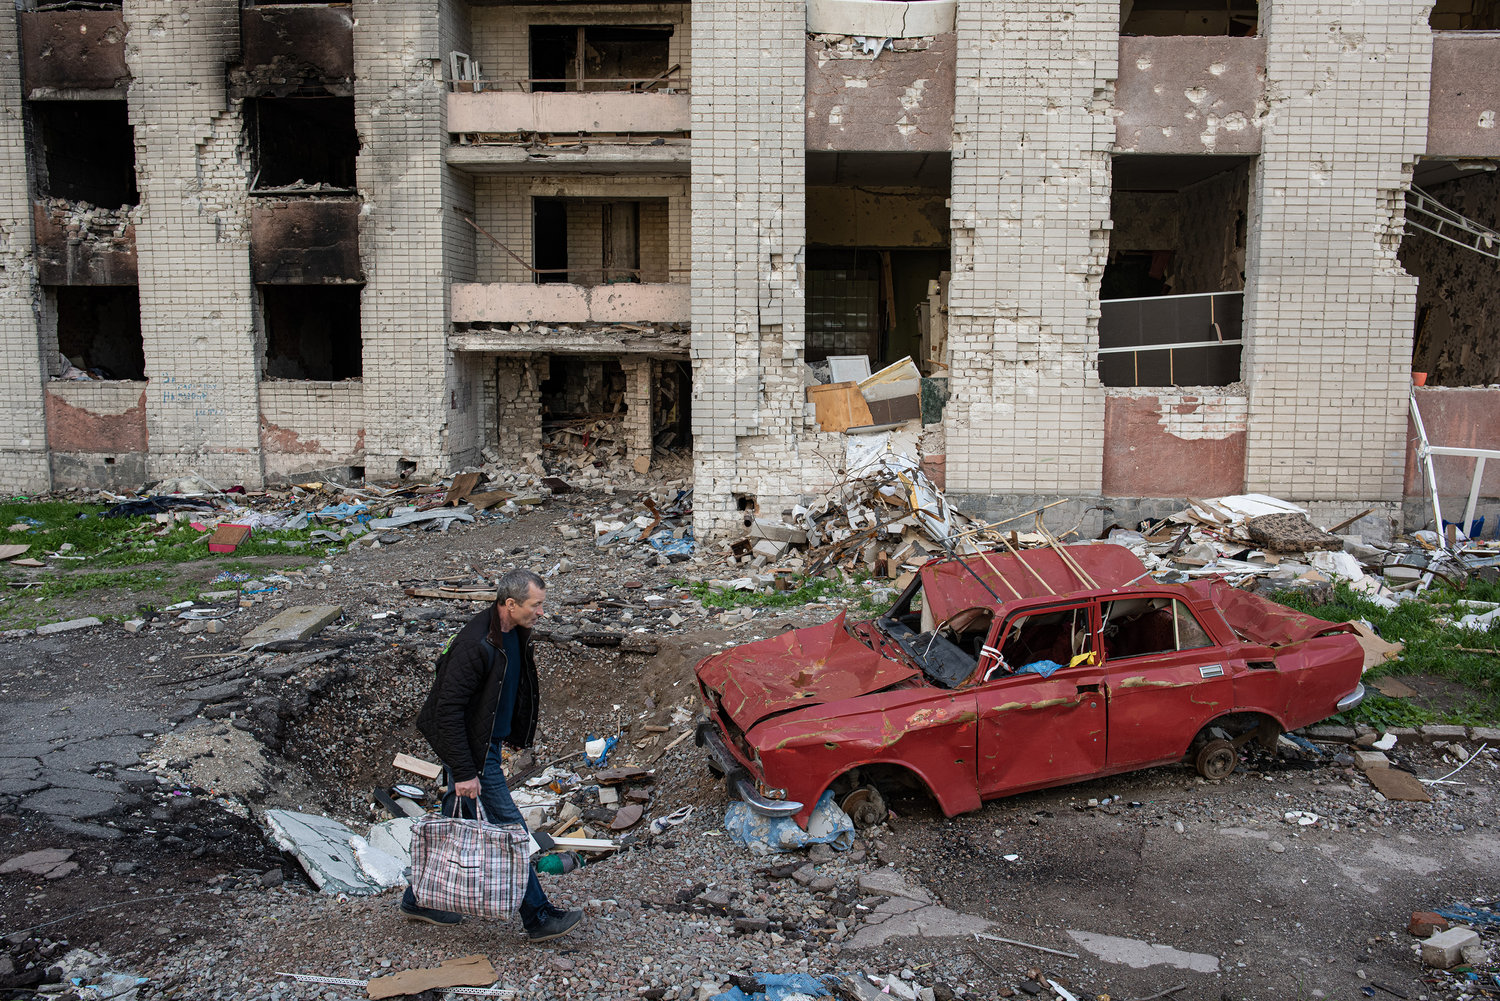 A man carries his belongings past a destroyed car next to a heavily damaged apartment building on May 28, 2022, in Chernihiv, Ukraine. (Alexey Furman/Getty Images/TNS)